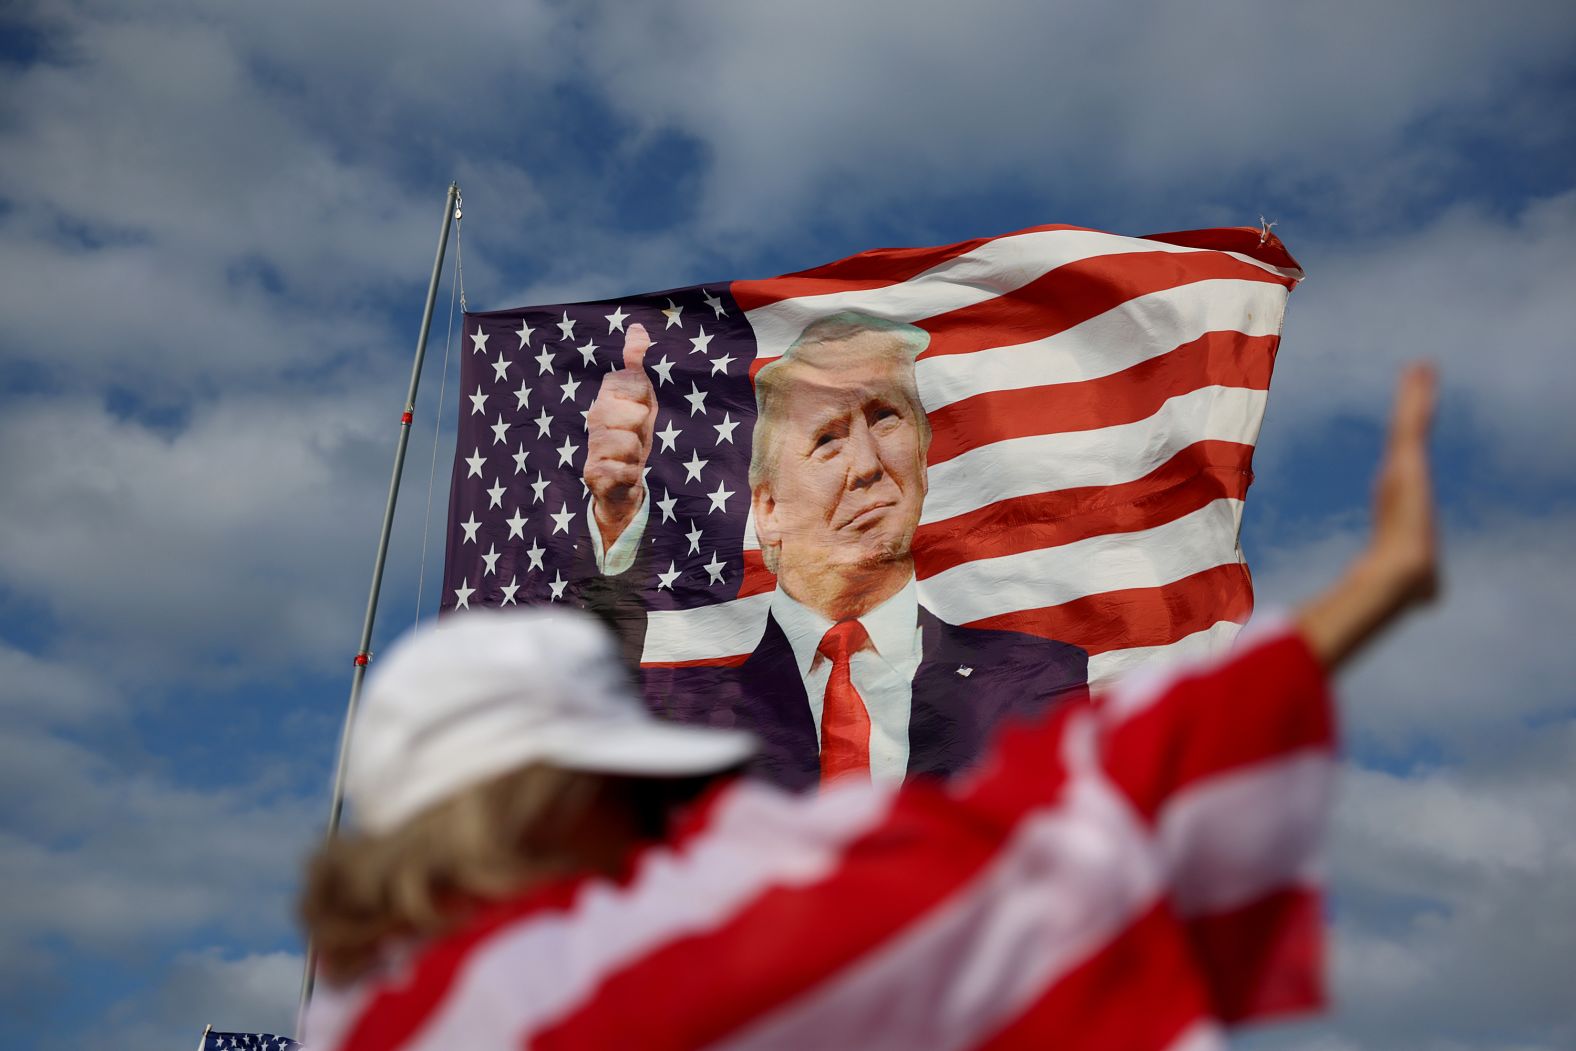 Evelyn Knapp walks past a Trump flag that his supporters were flying near his Mar-a-Lago home on March 20.